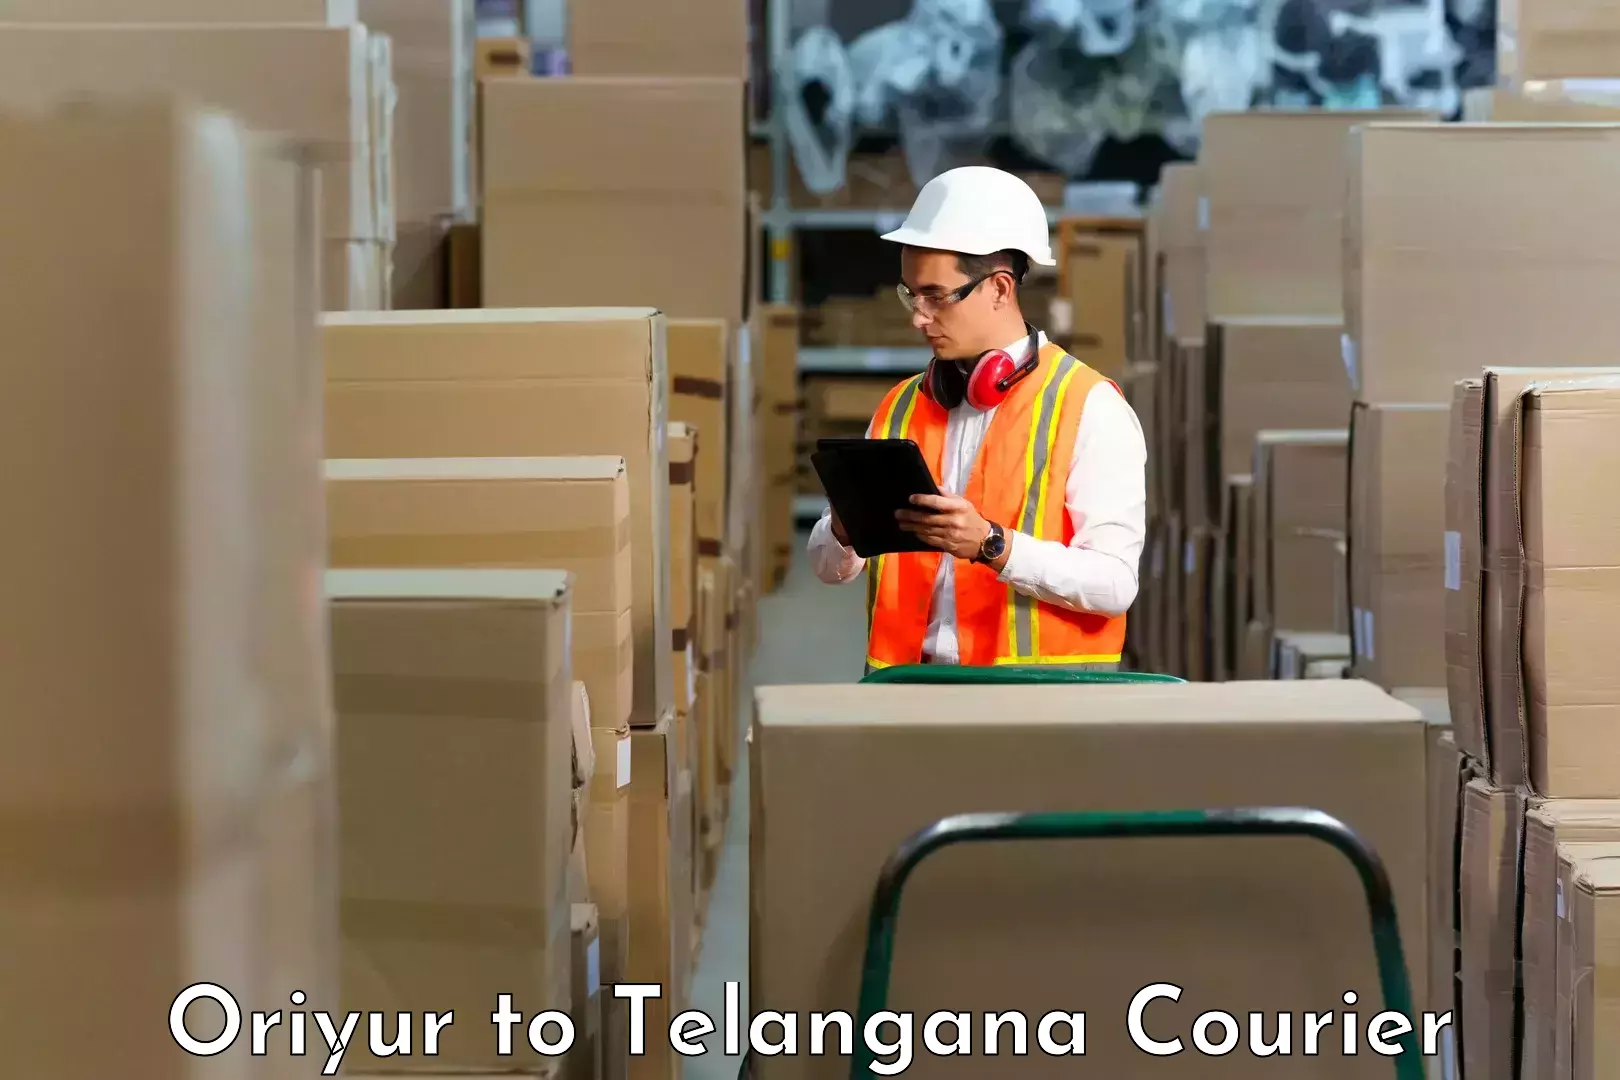 Local delivery service Oriyur to Telangana